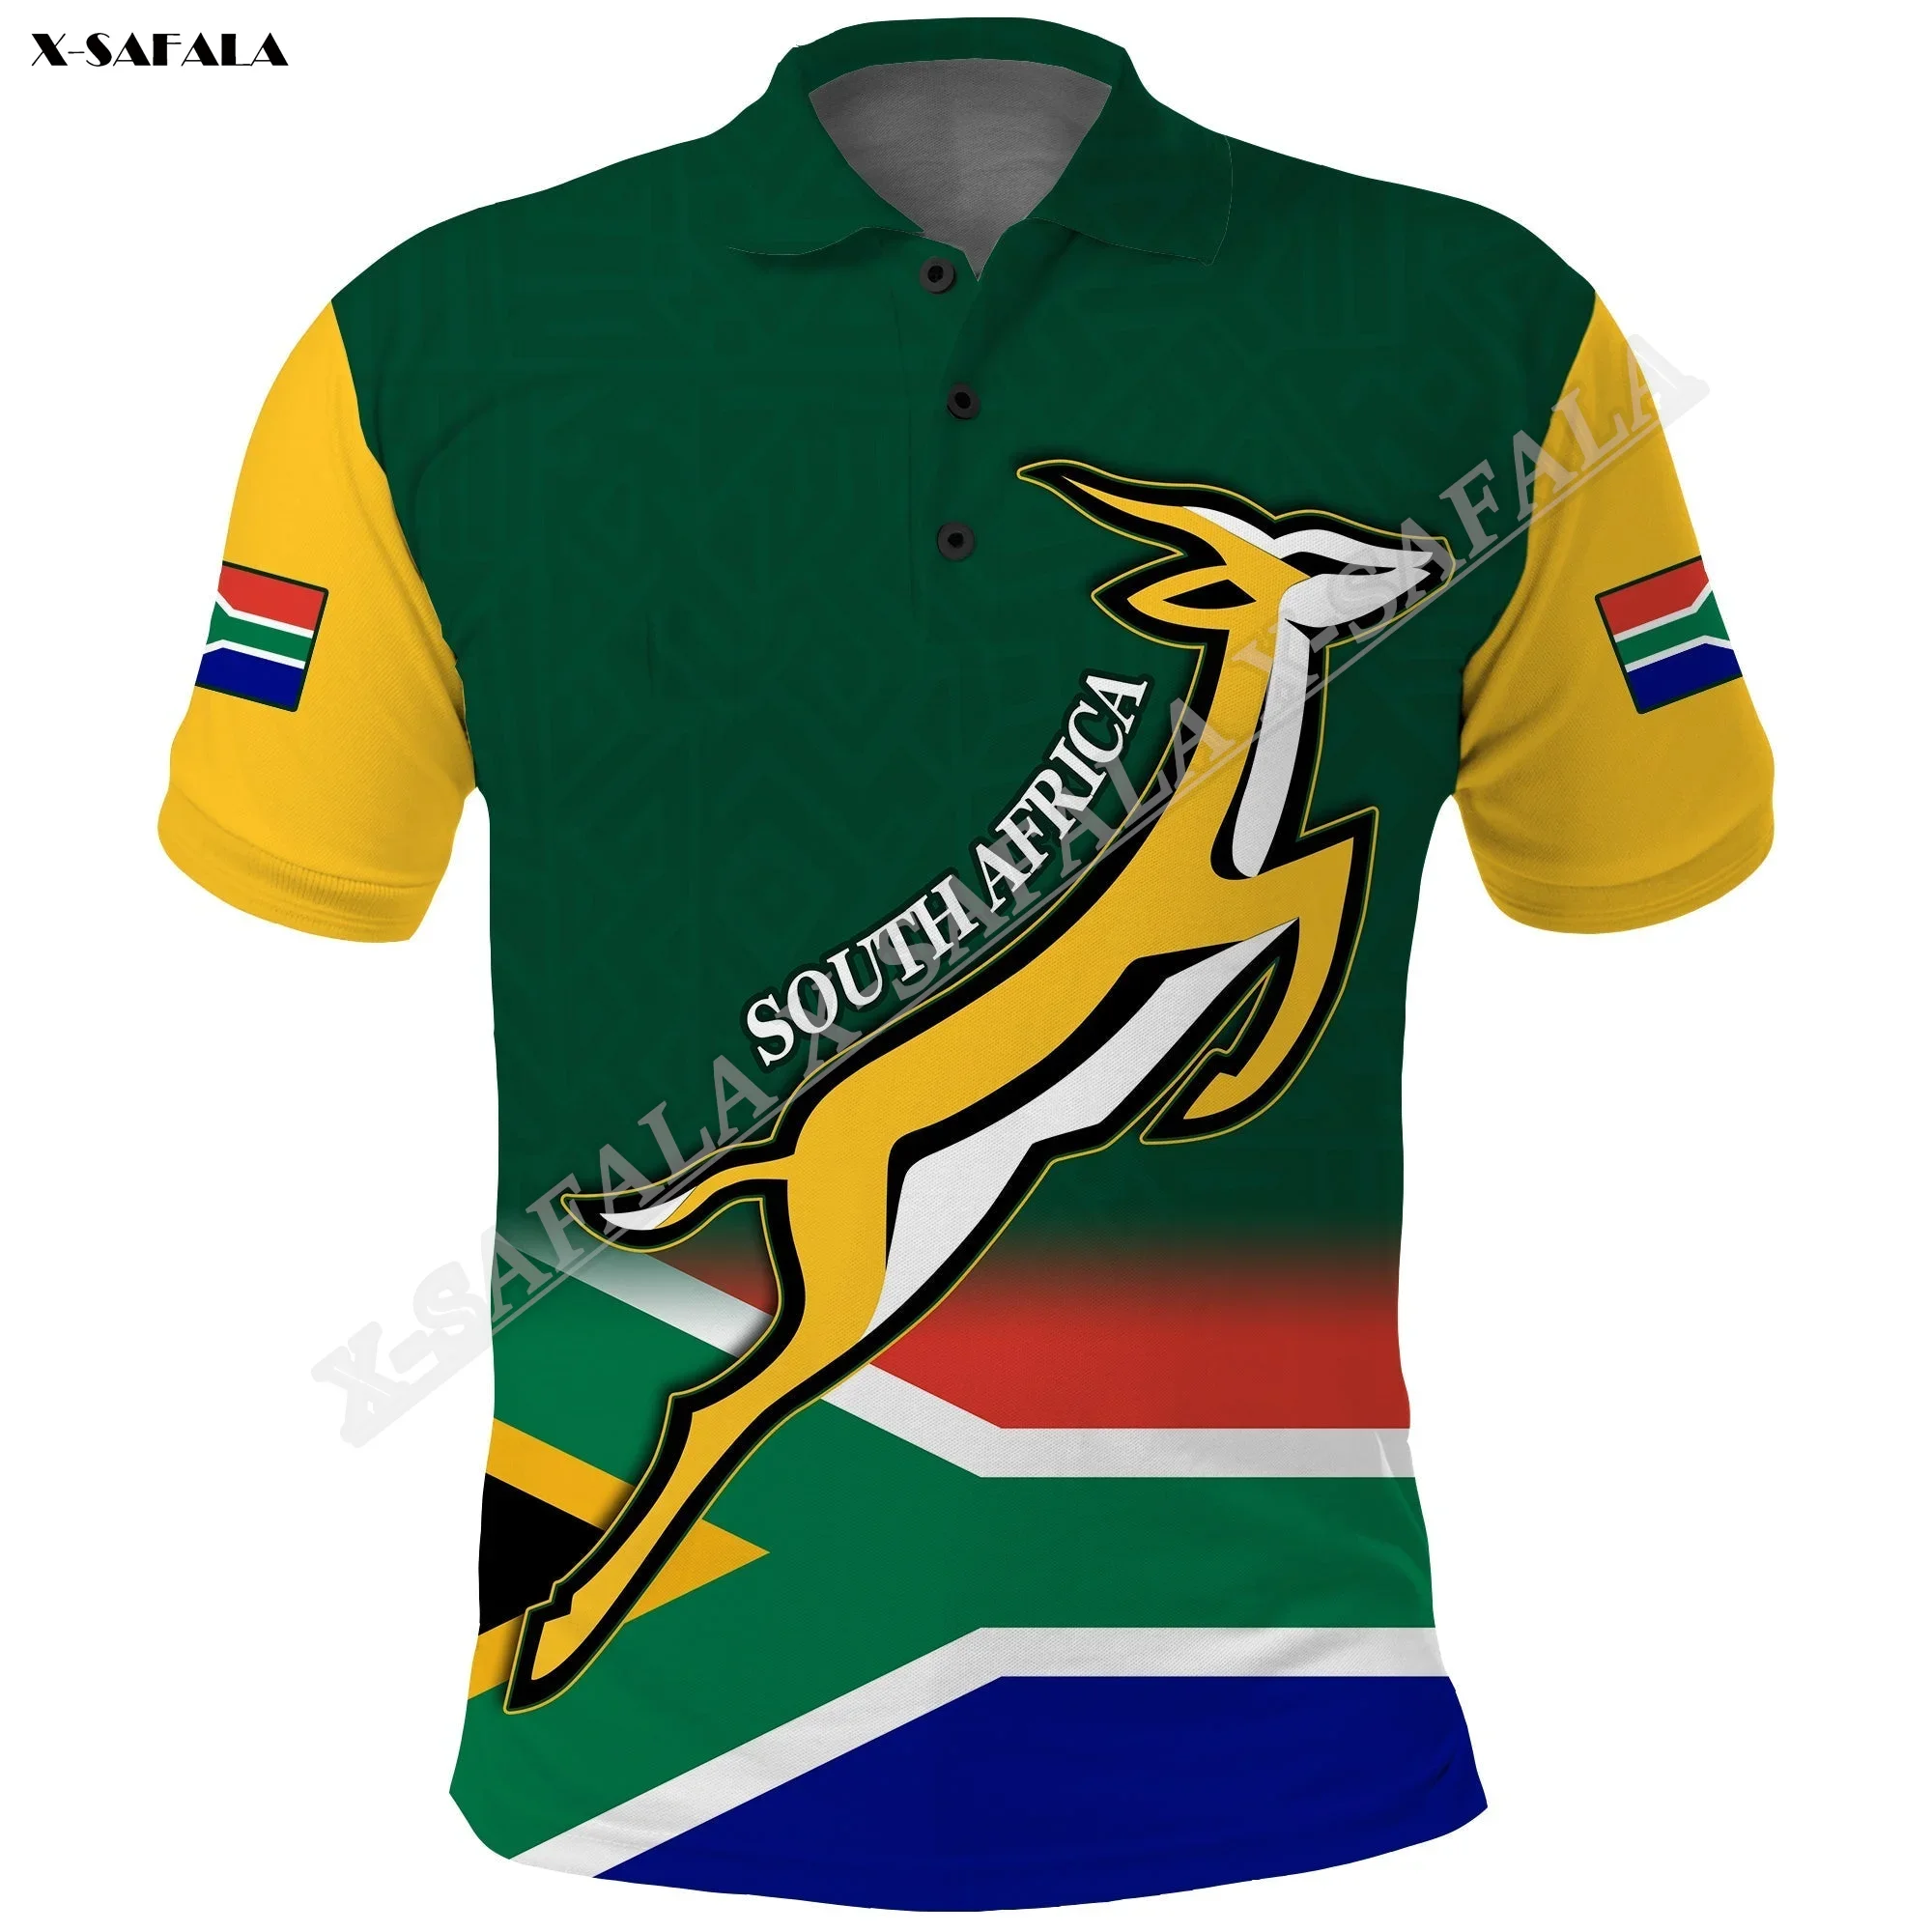 

South Africa Rugby Go Springboks 3D Printed For Men Adult Polo Shirt Collar Short Sleeve Top Tee Breathable Anti Shrink